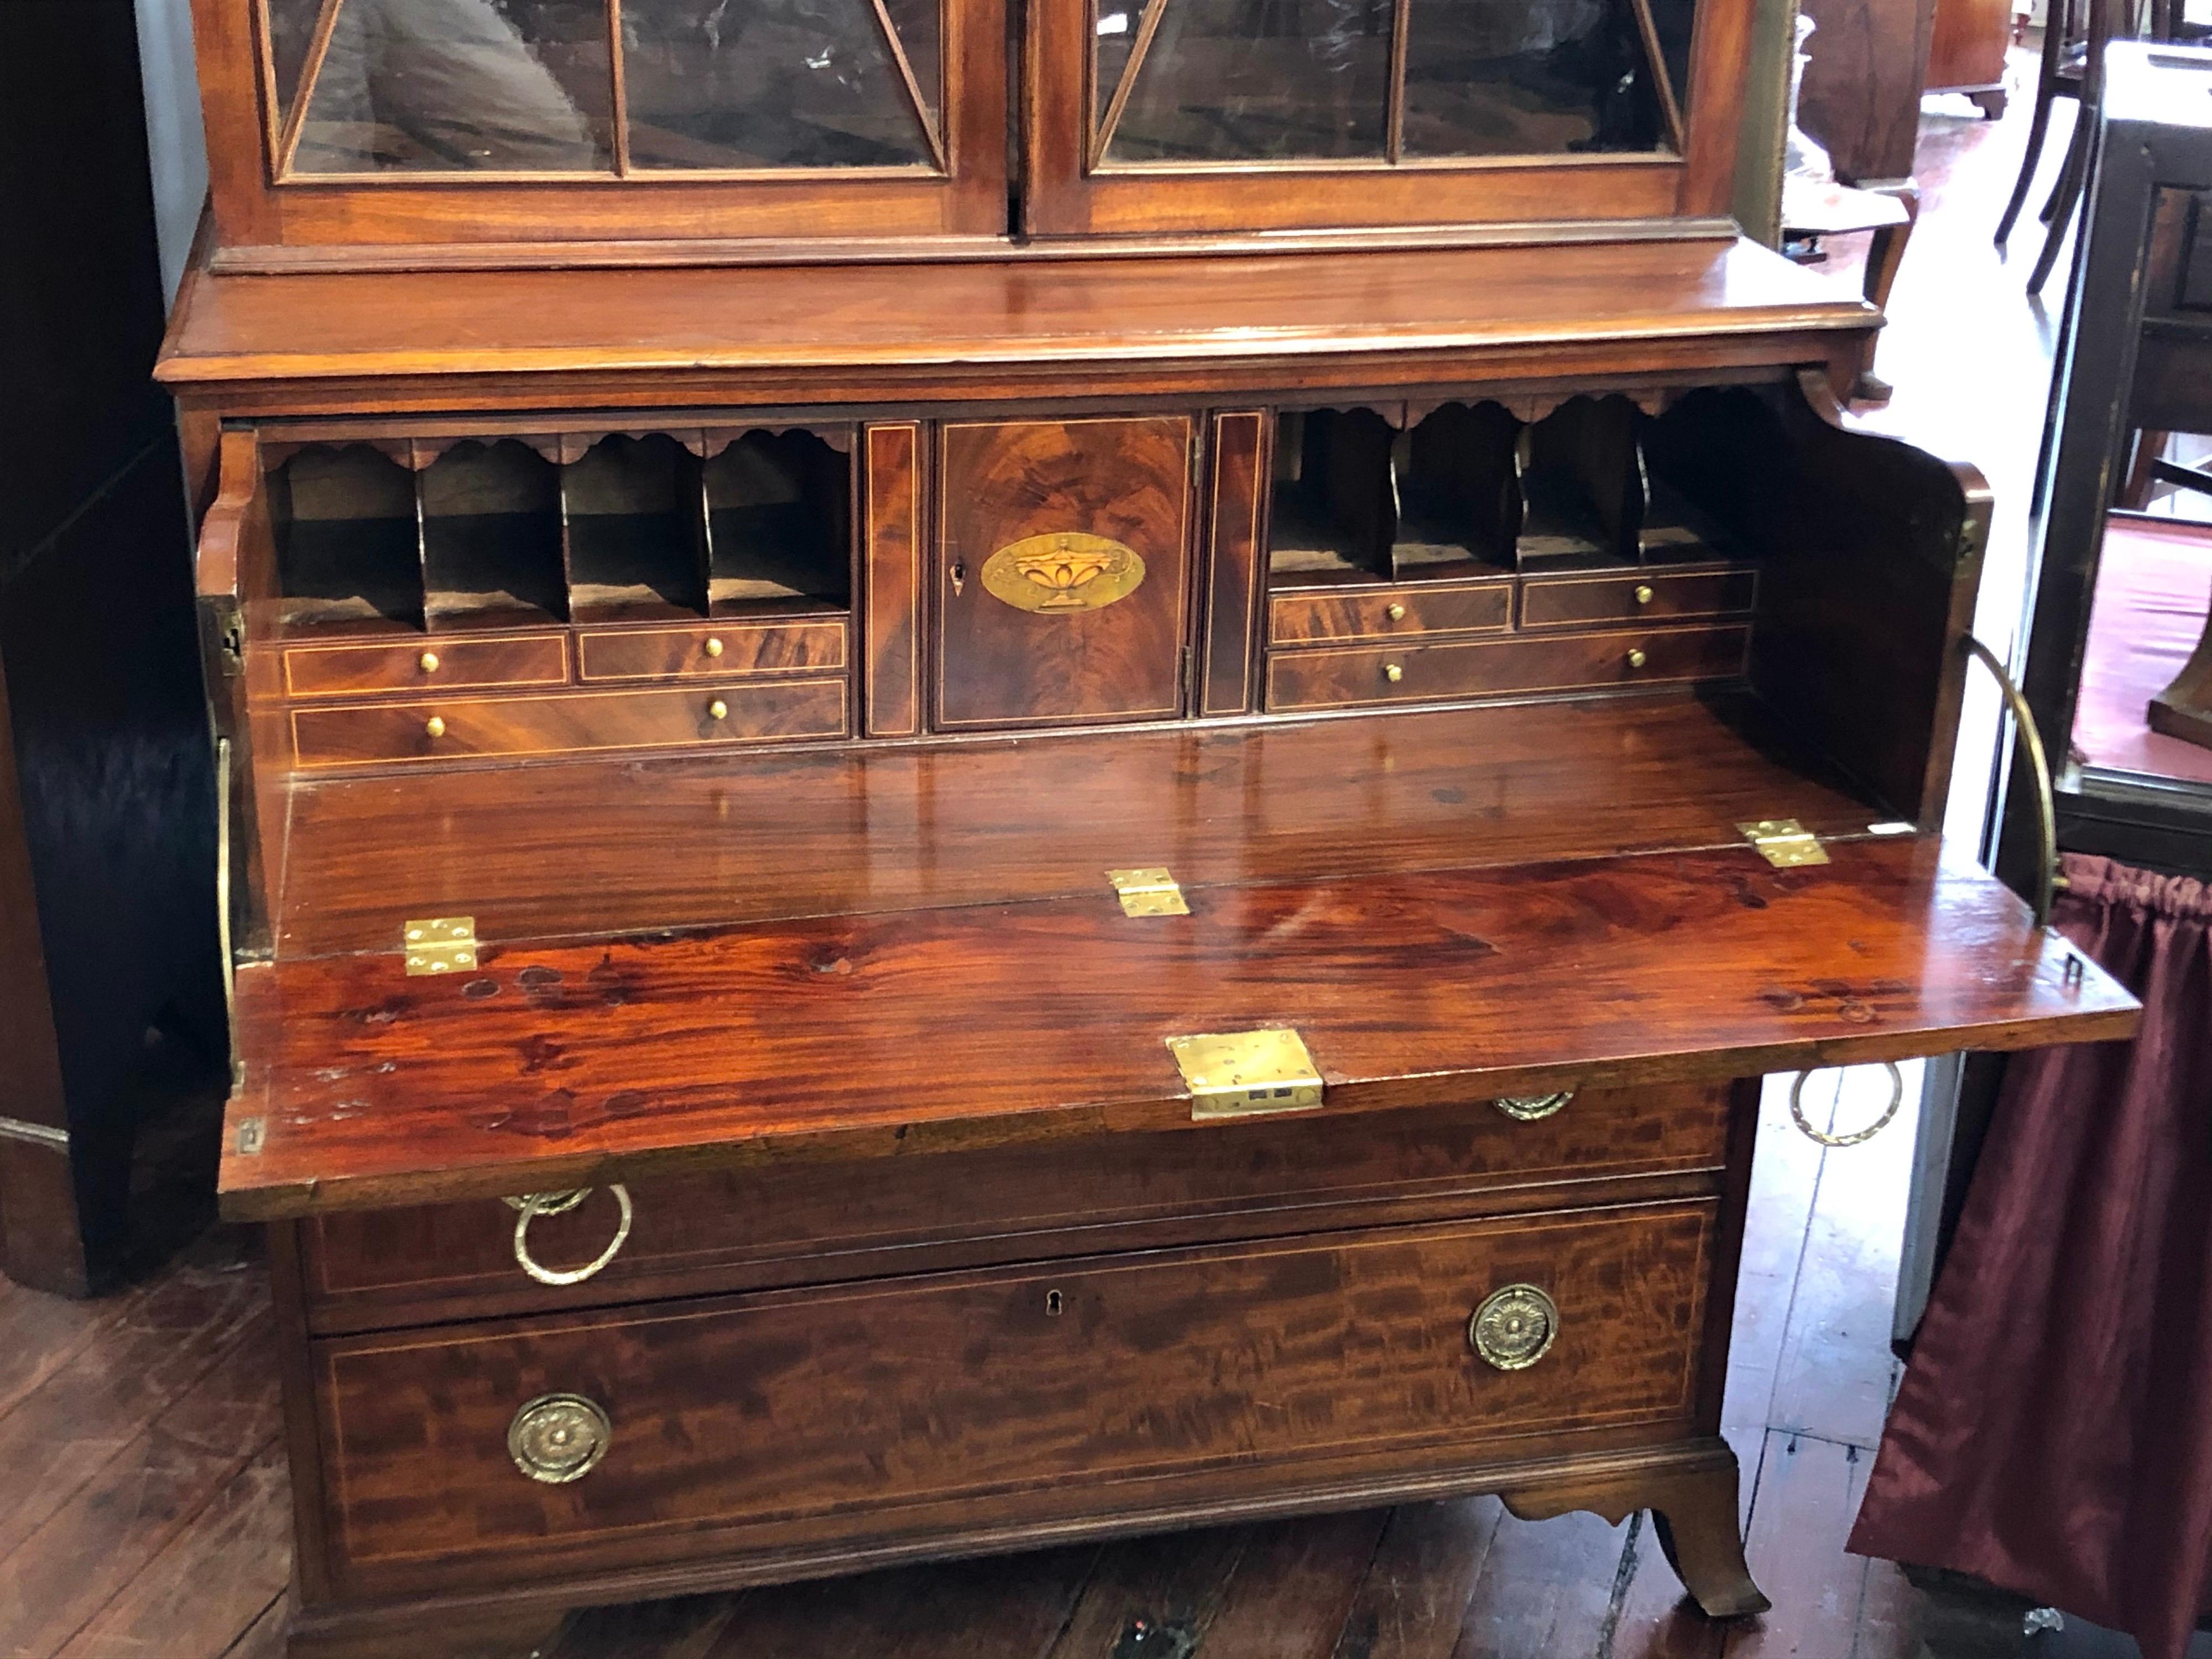 Hand-Crafted Antique American Inlaid Figured Mahogany Secretaire Bookcase w/Eli Terry Locks